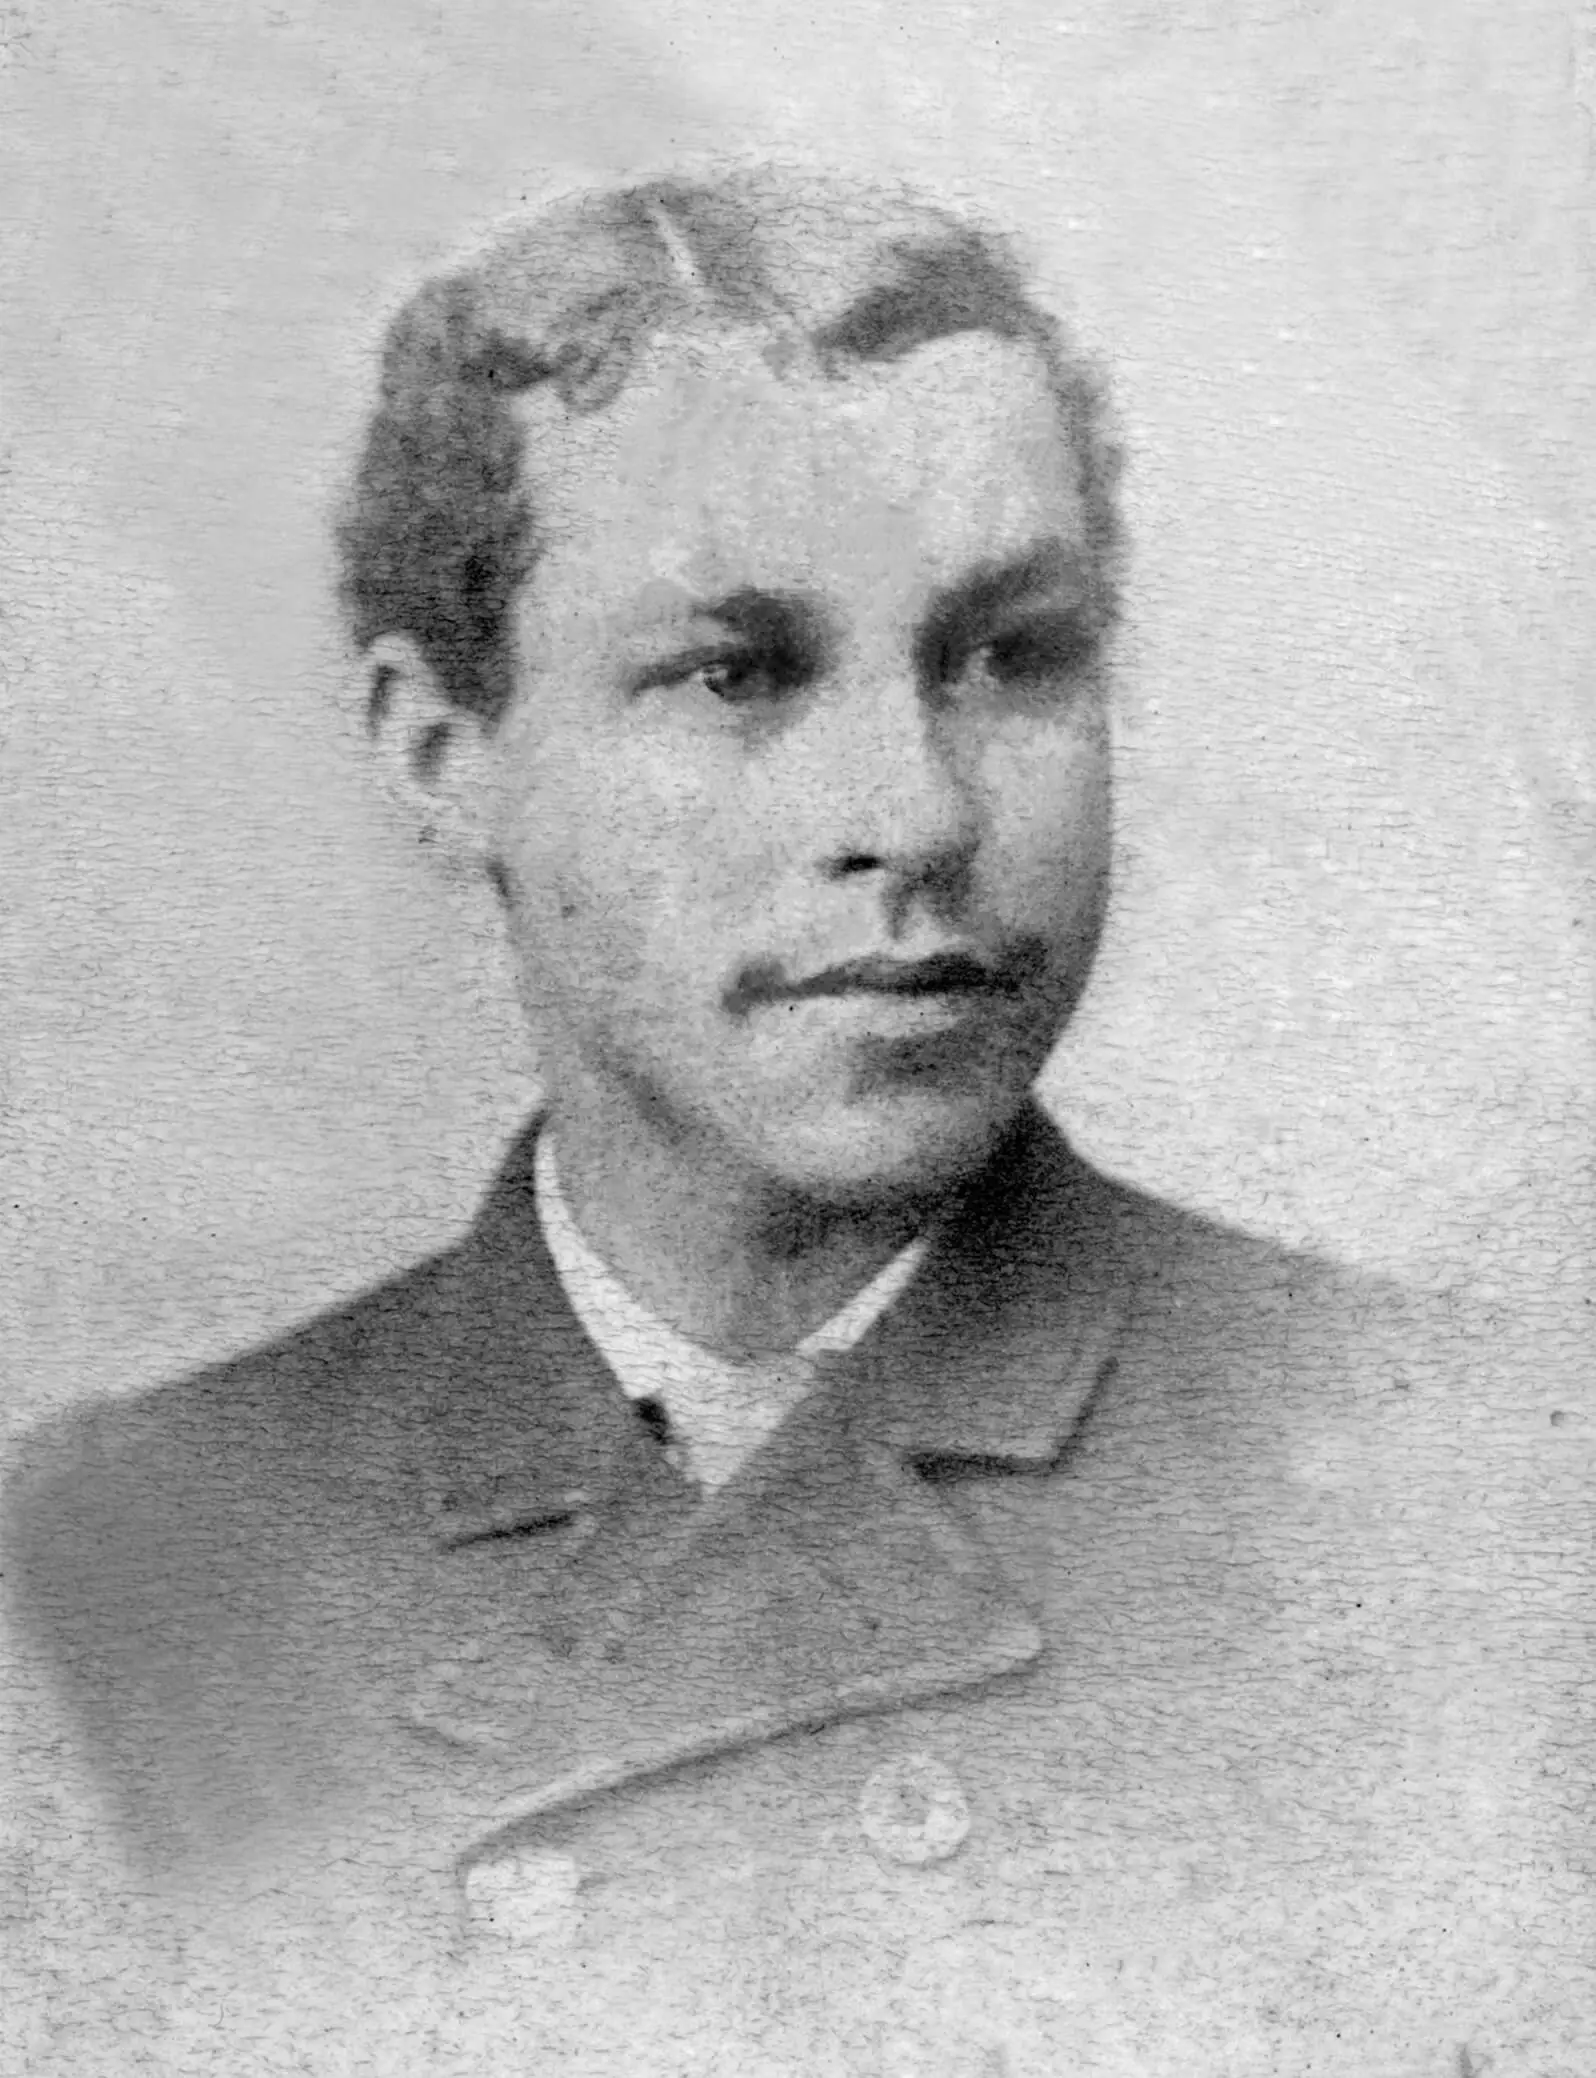 Photo of a young Black man with short dark hair and wearing a dark jacket, tie and collard shirt. There appear to be hints of a mustache at the corners of his lips. His hair is dark and wavy and parted on the side.